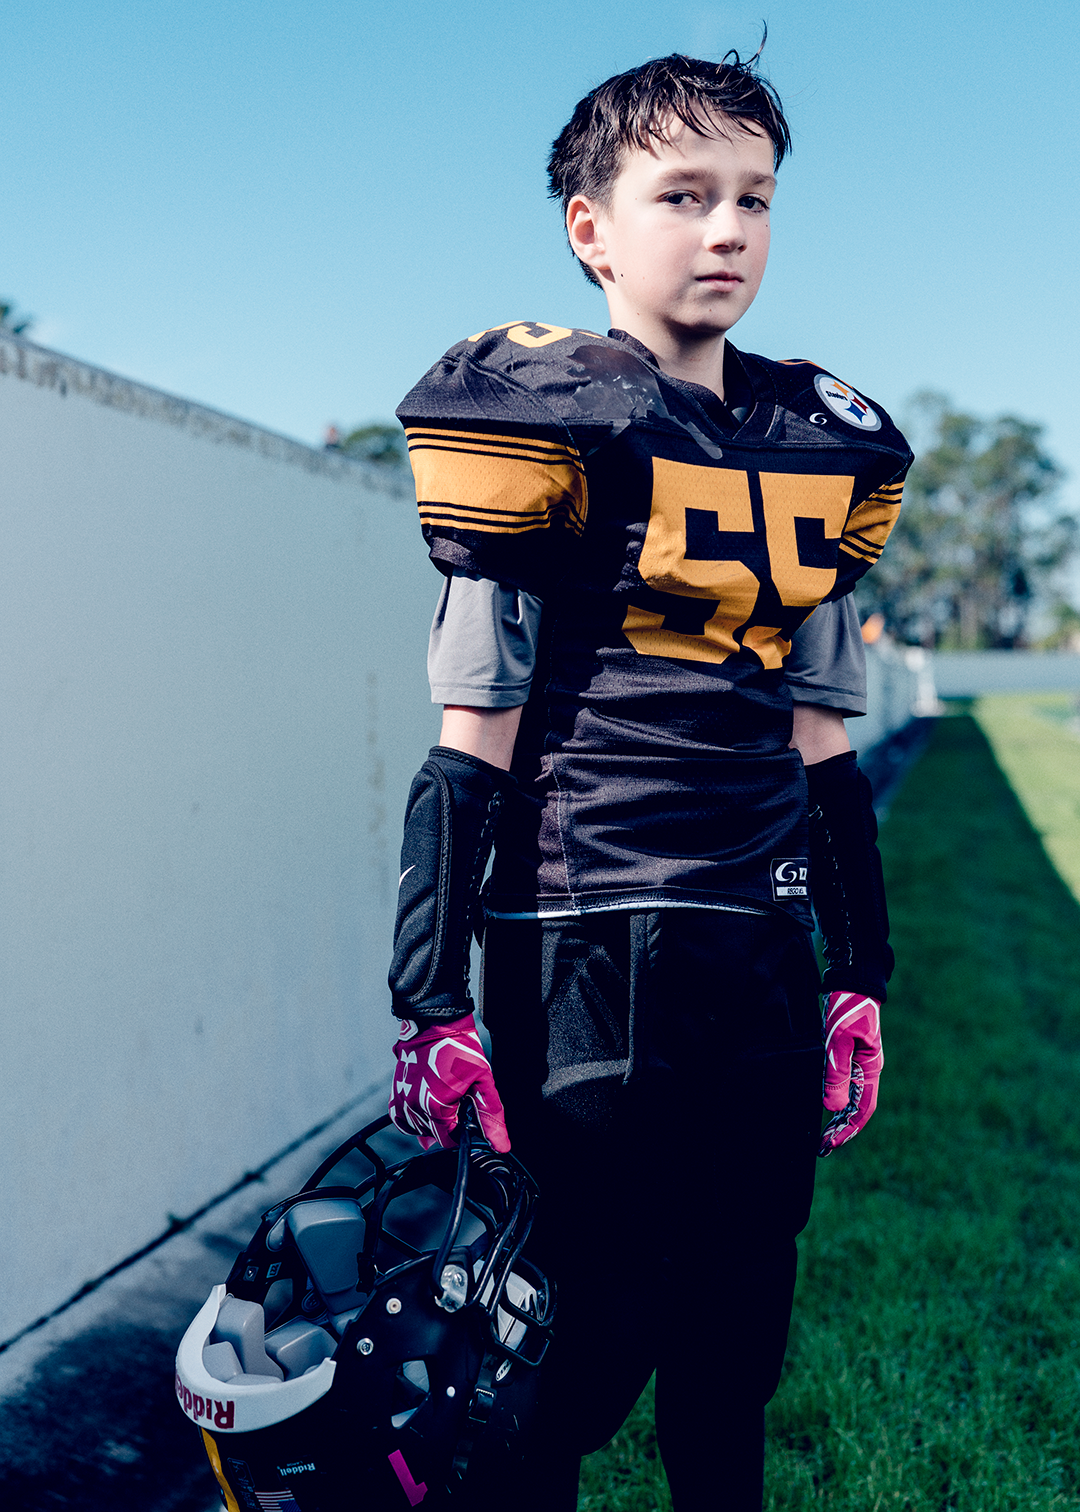 Developing Aggression in Youth Football Players